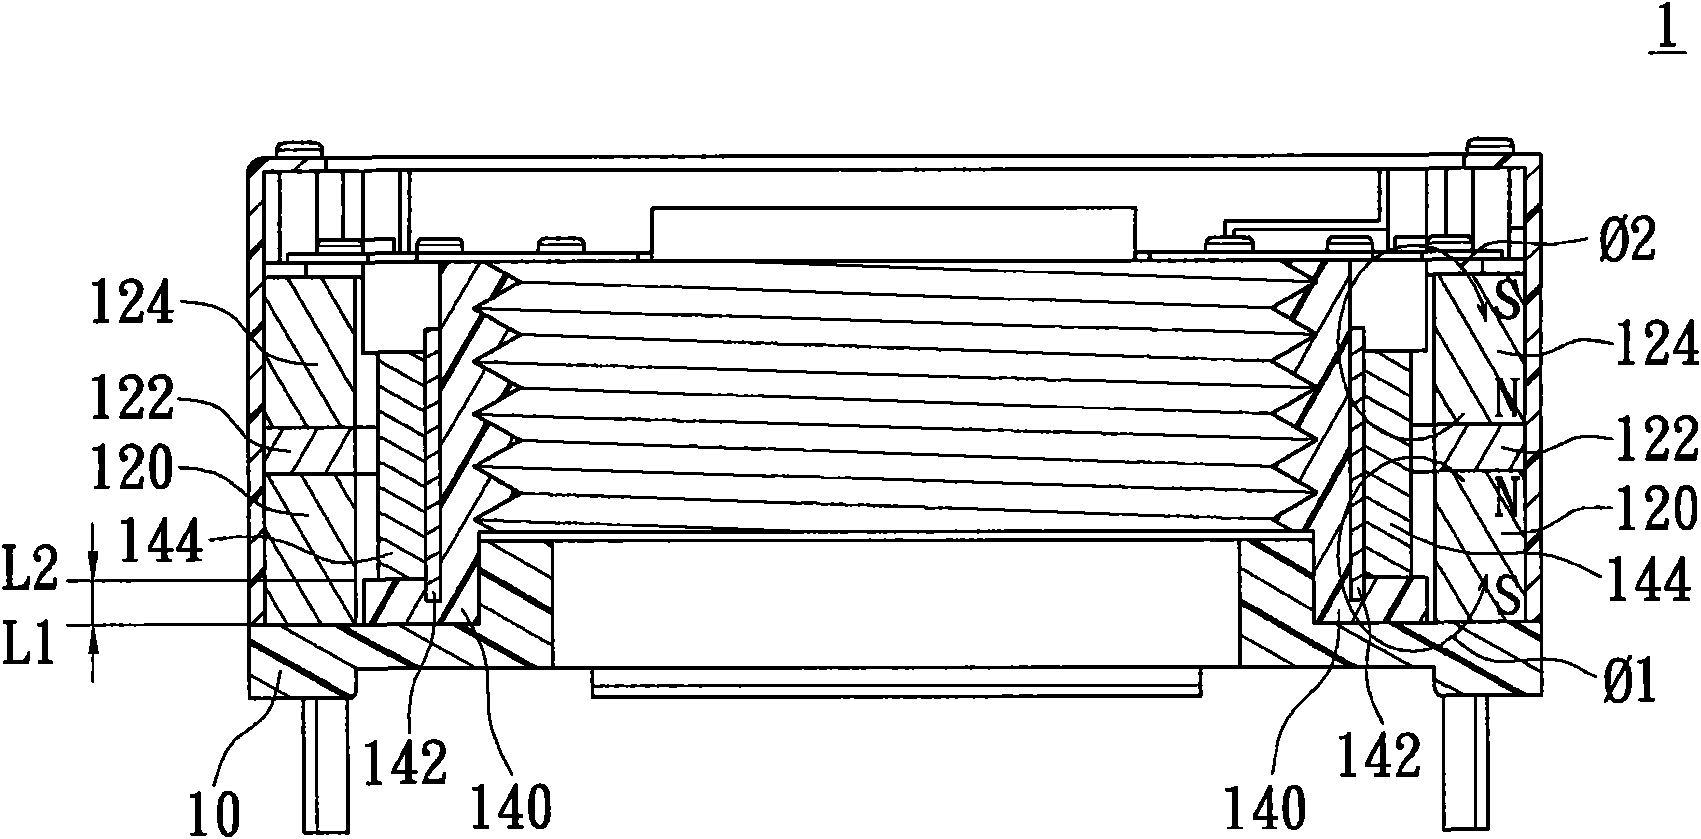 Lens actuating device